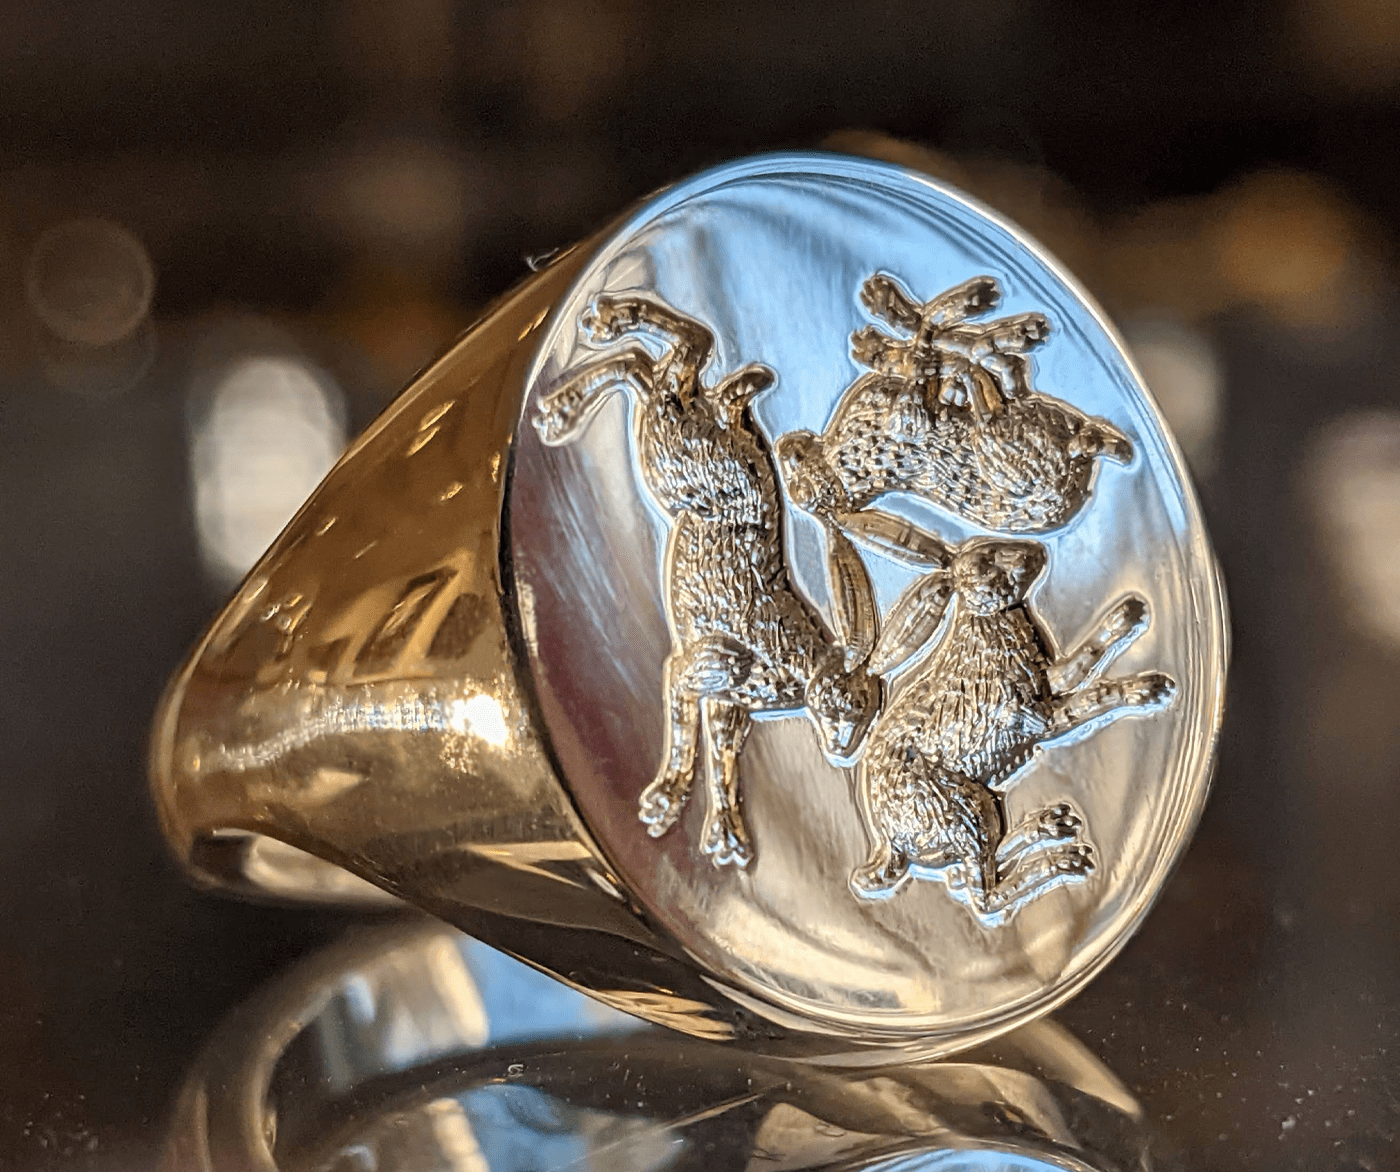 Personalised gold Rebus Signet Ring with hand engraved rabbit design for the Lunar New Year